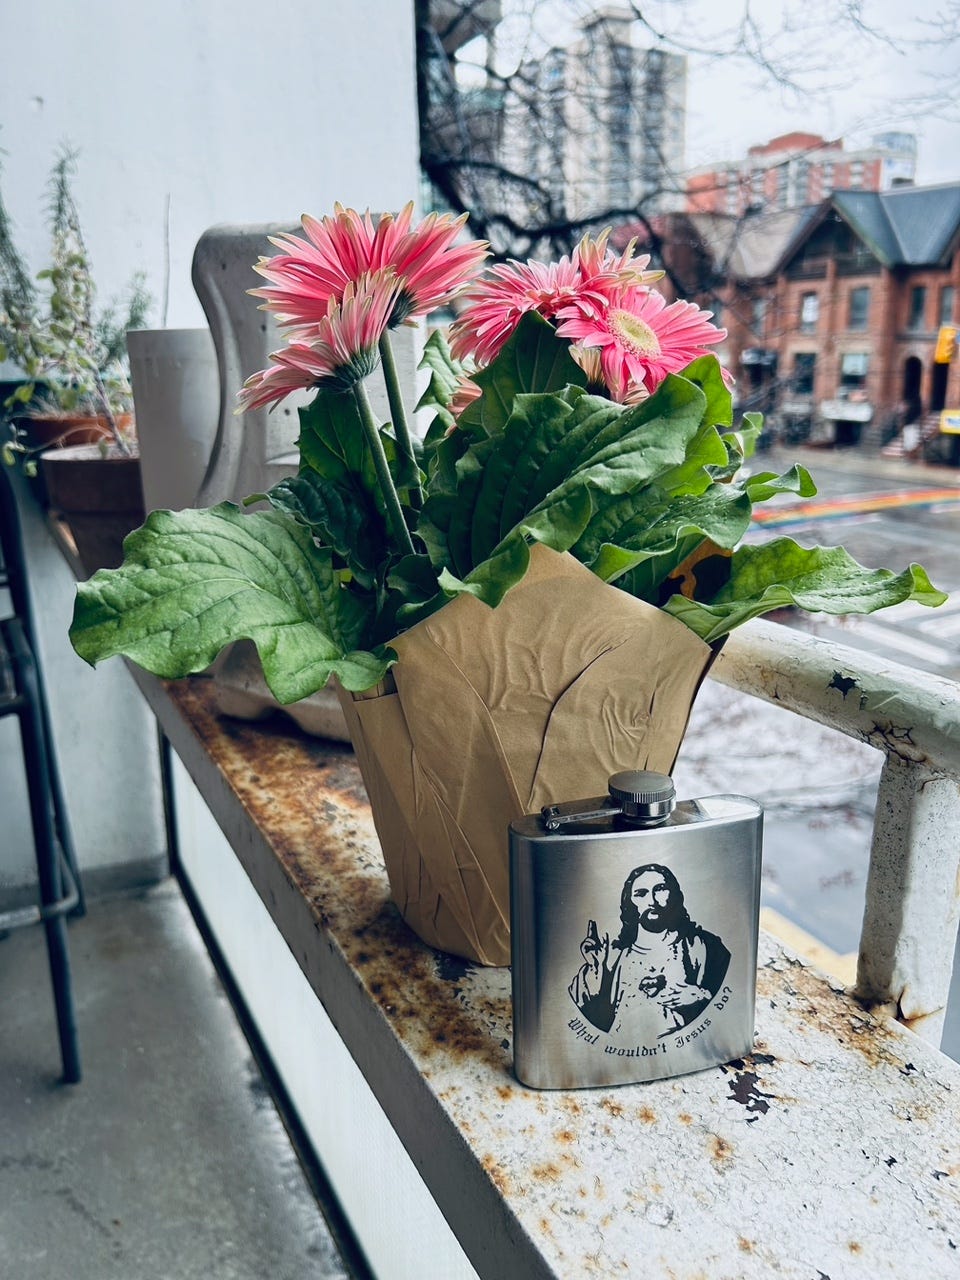 On a balcony, a potted plant of mums beside a flask with an image of Jesus on it and the words "What would Jesus do?"